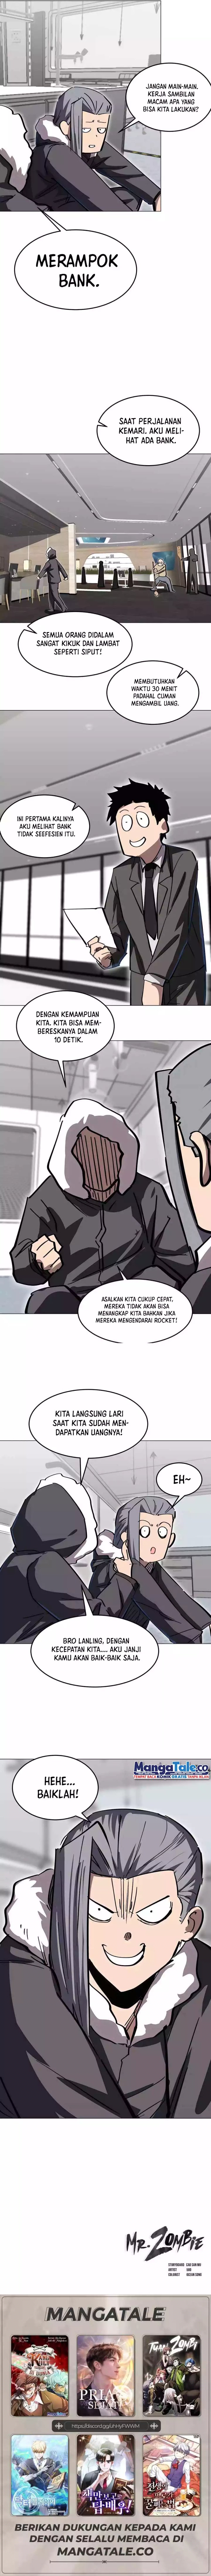 Mr. Zombie Chapter 54 Image 6